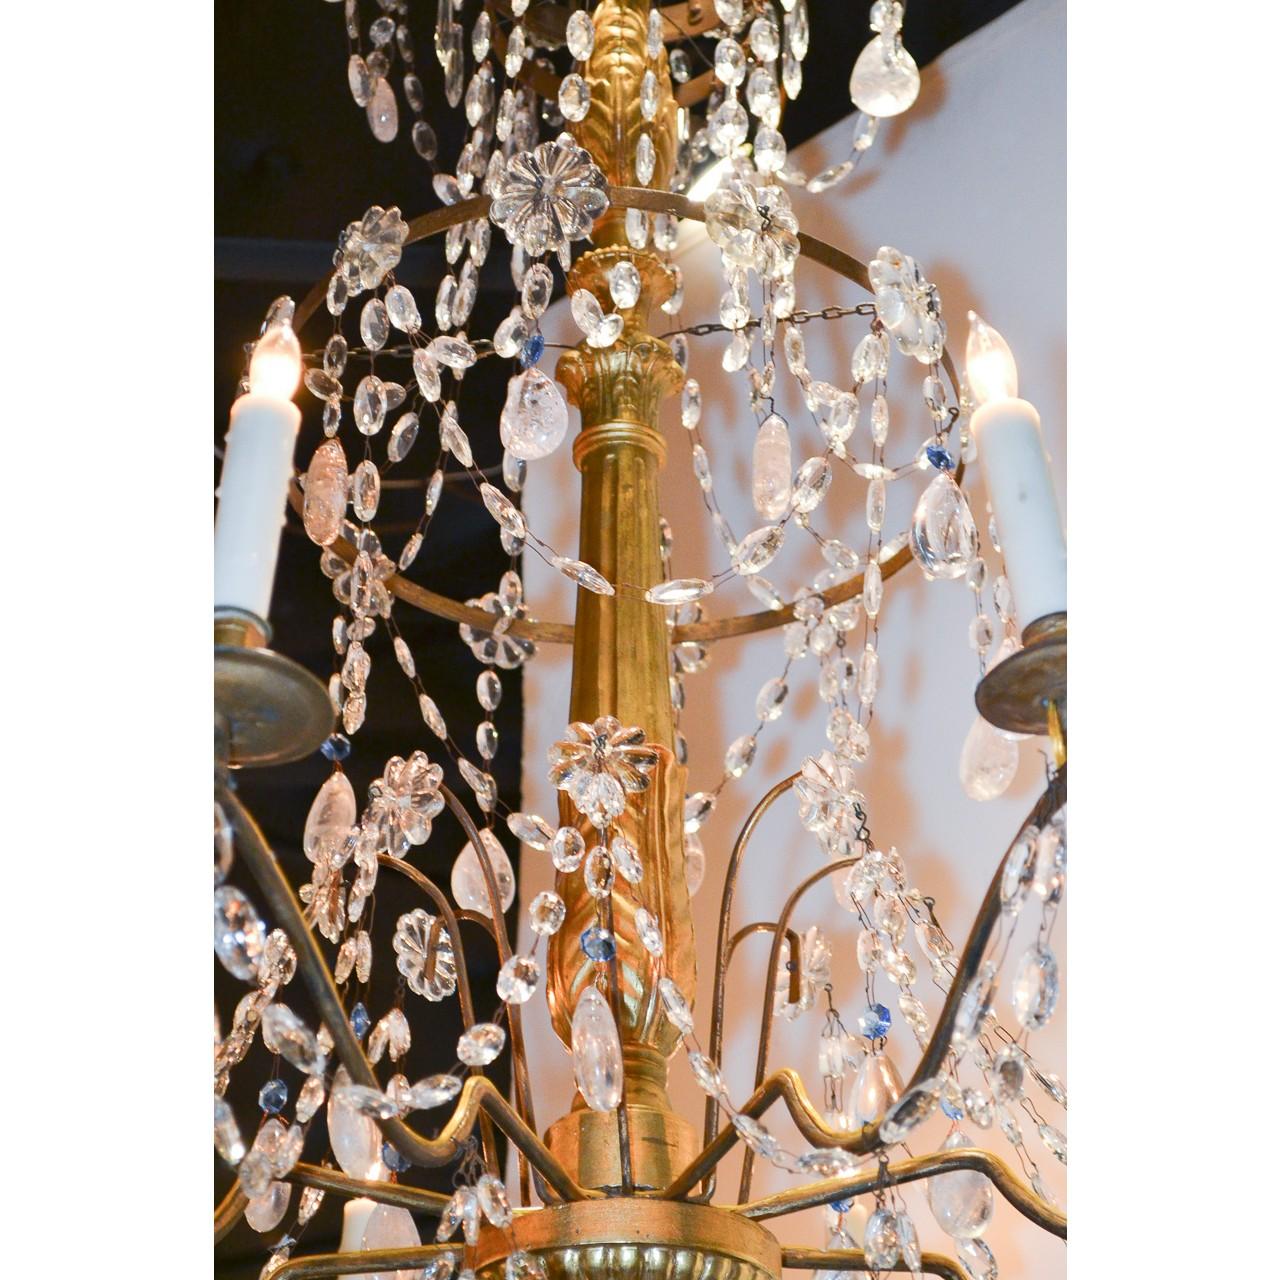 Superb 18th century Italian giltwood and crystal chandelier. The shaped hand-carved stem features three tiers elegantly decorated with almond-shaped crystals, strands of bead crystals, rosettes, and touches of sky-blue crystal accents. The